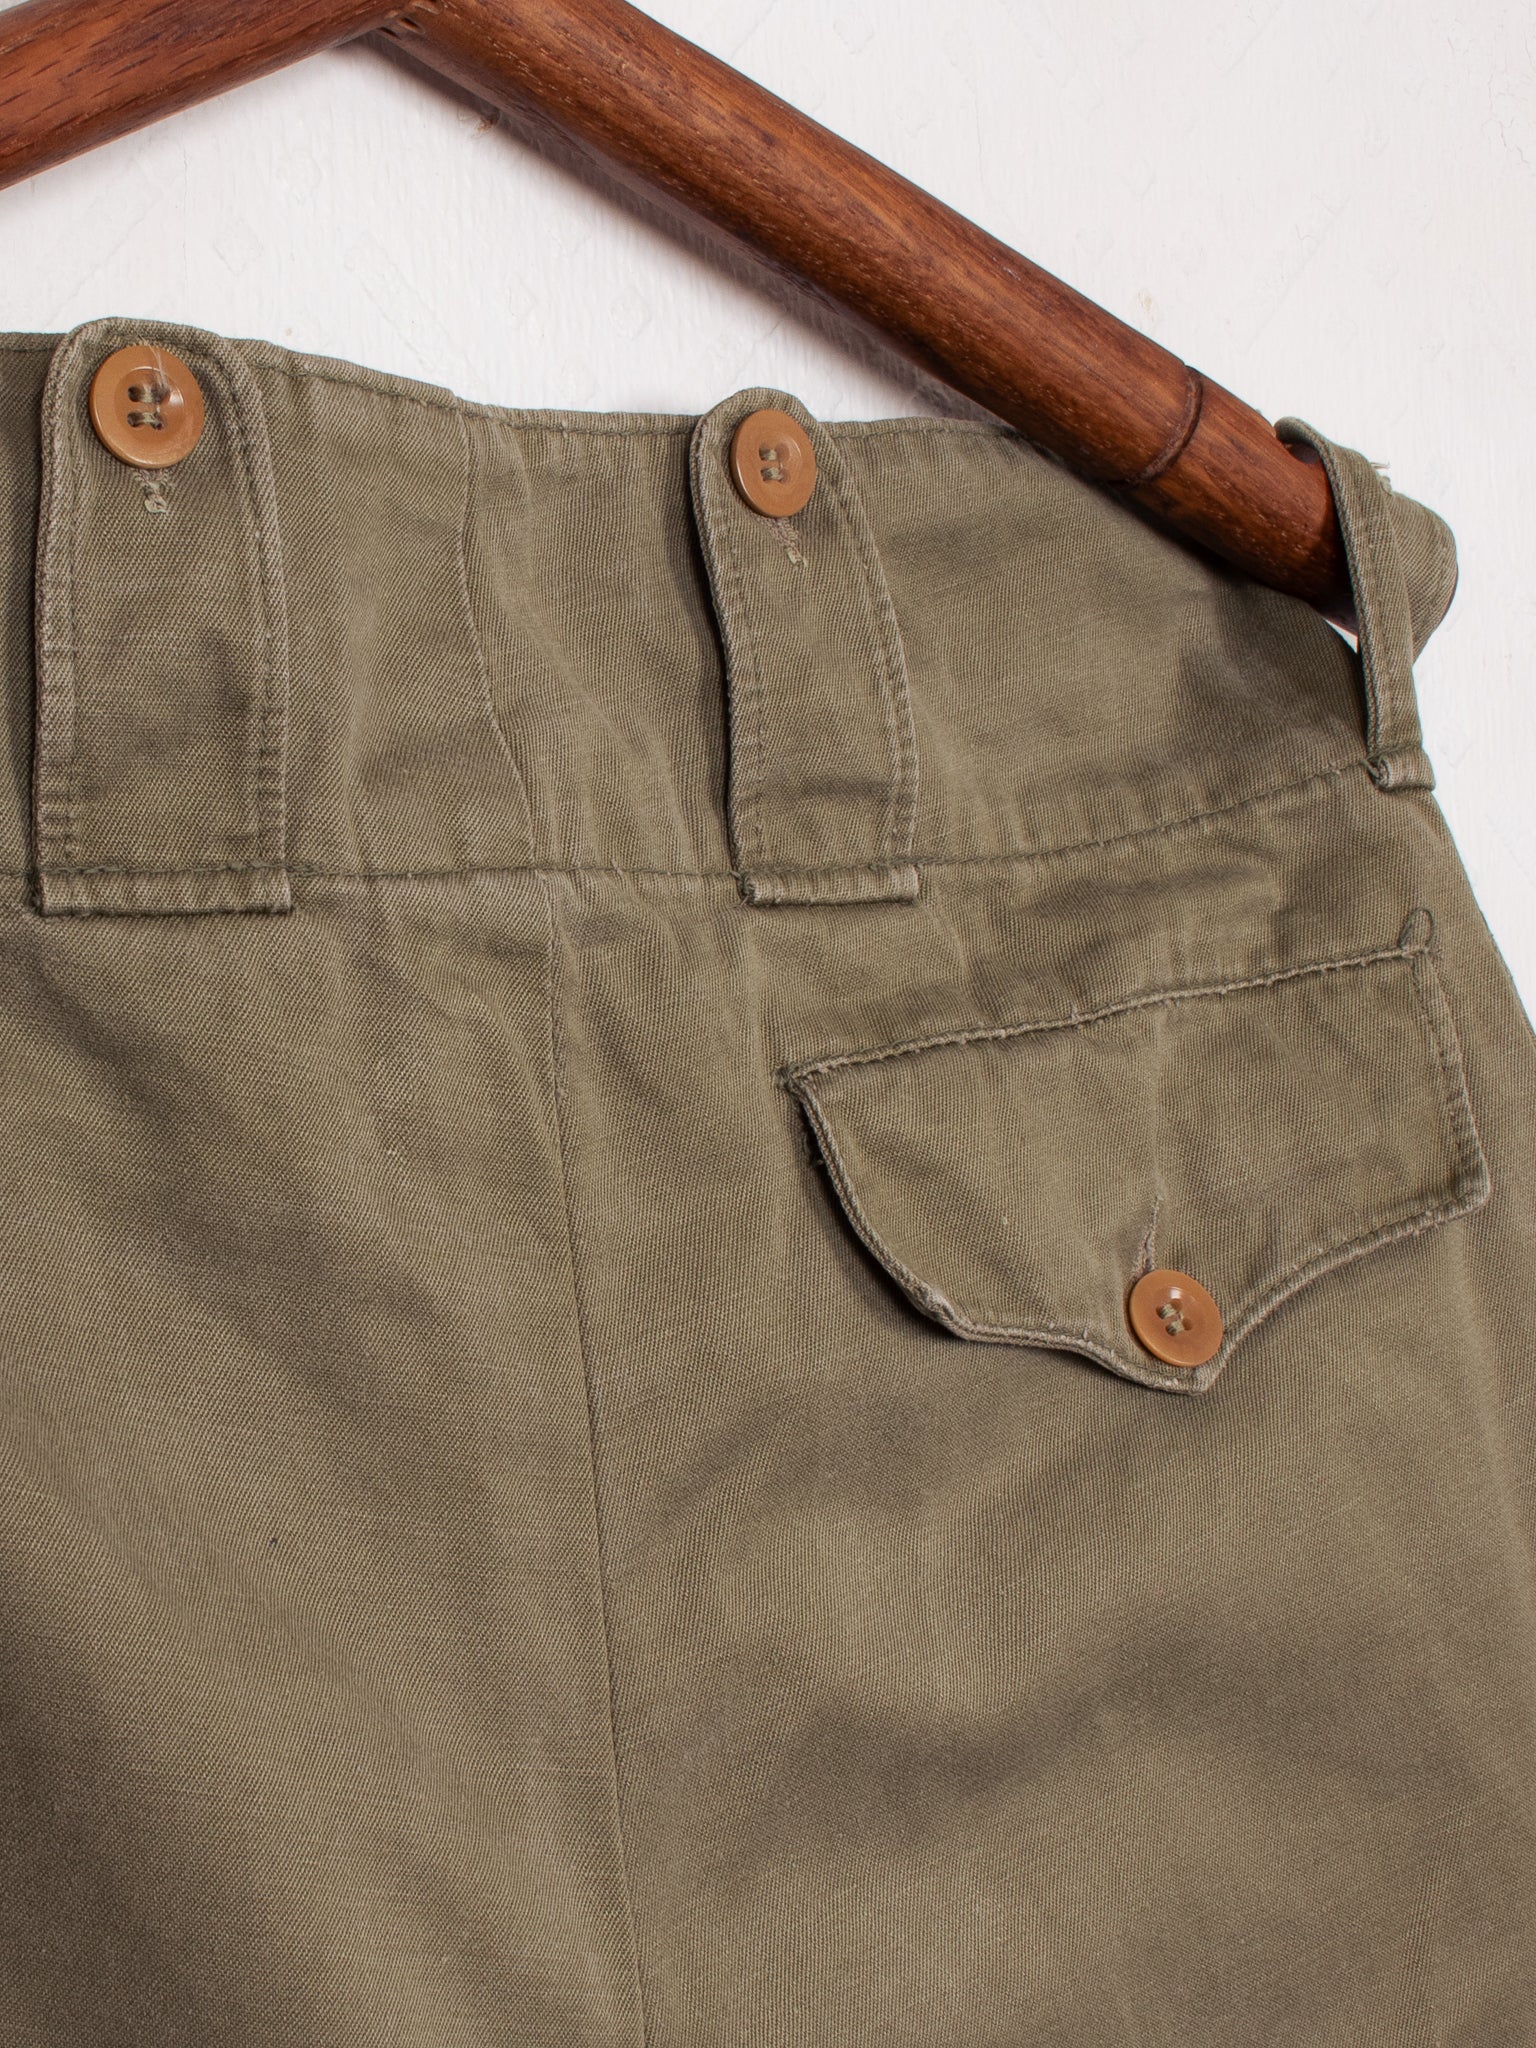 pants & trousers 50s ABL Army Trousers - W33